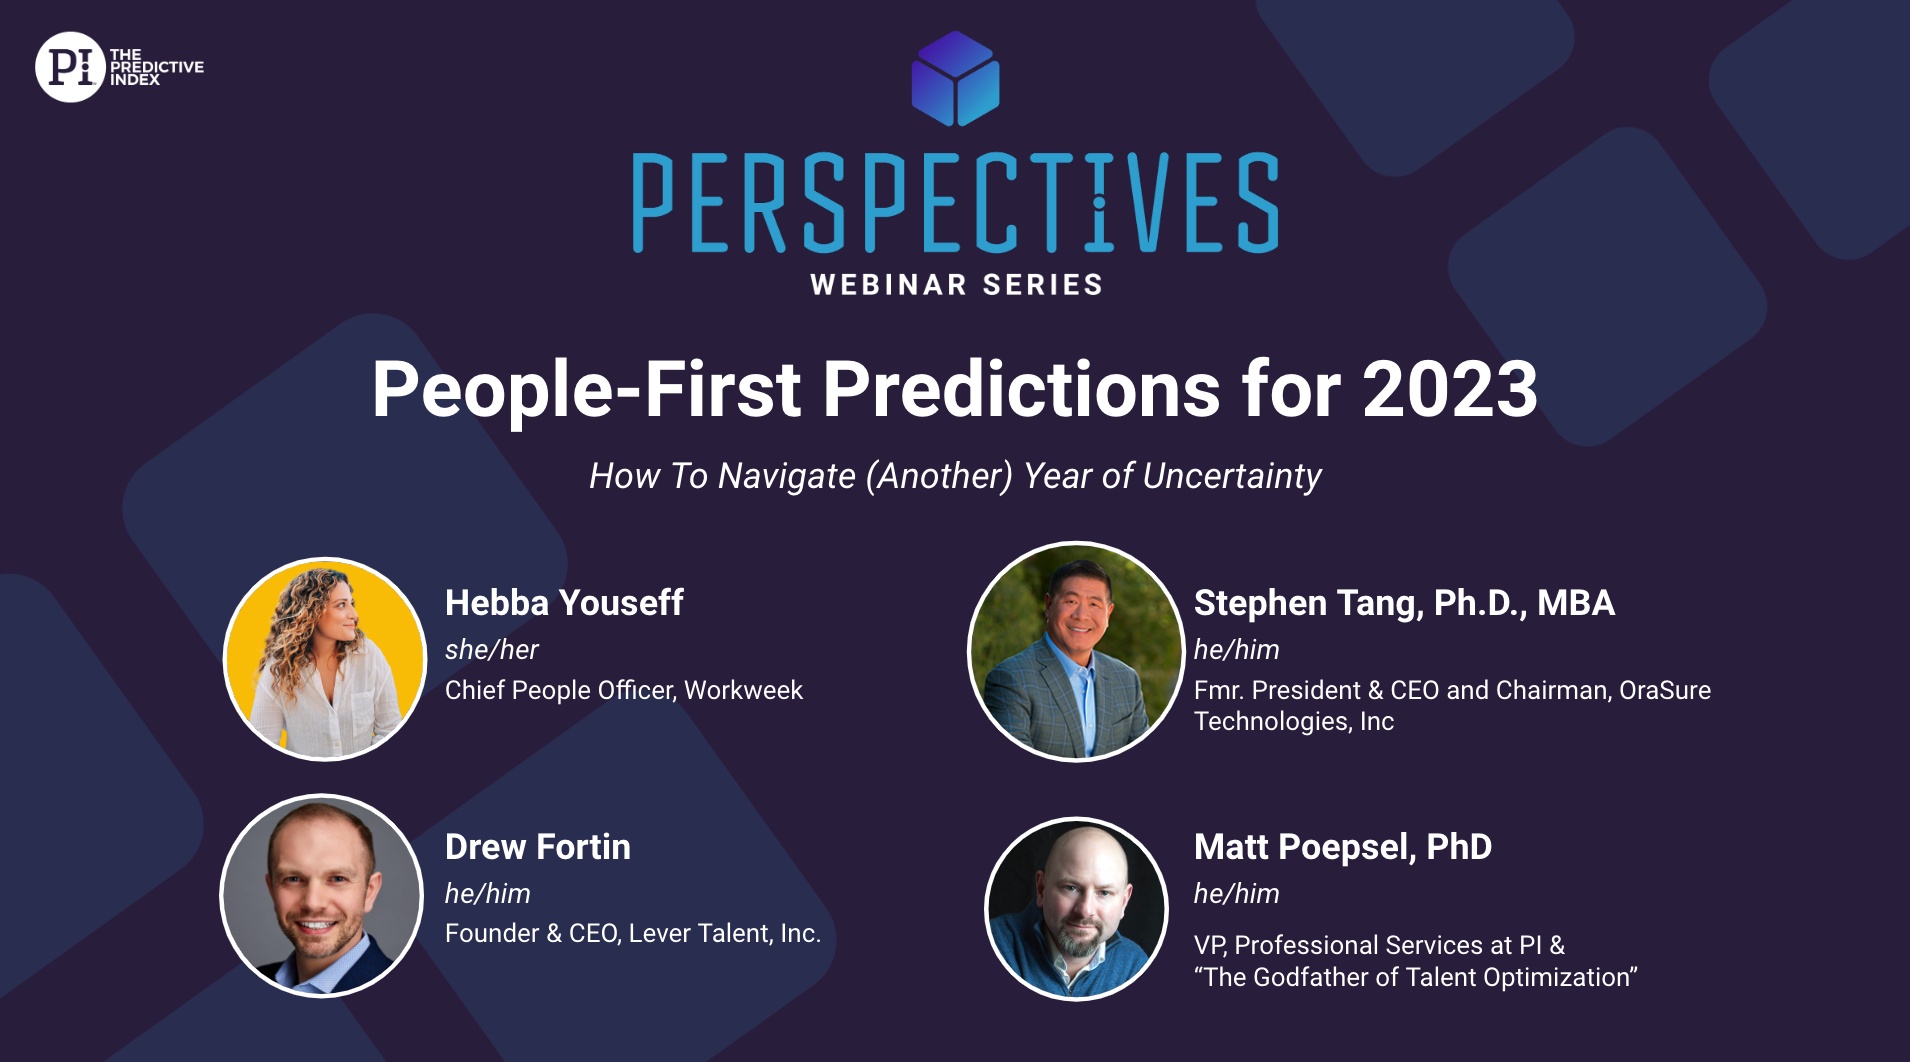 Perspectives: People-First Predictions for 2023